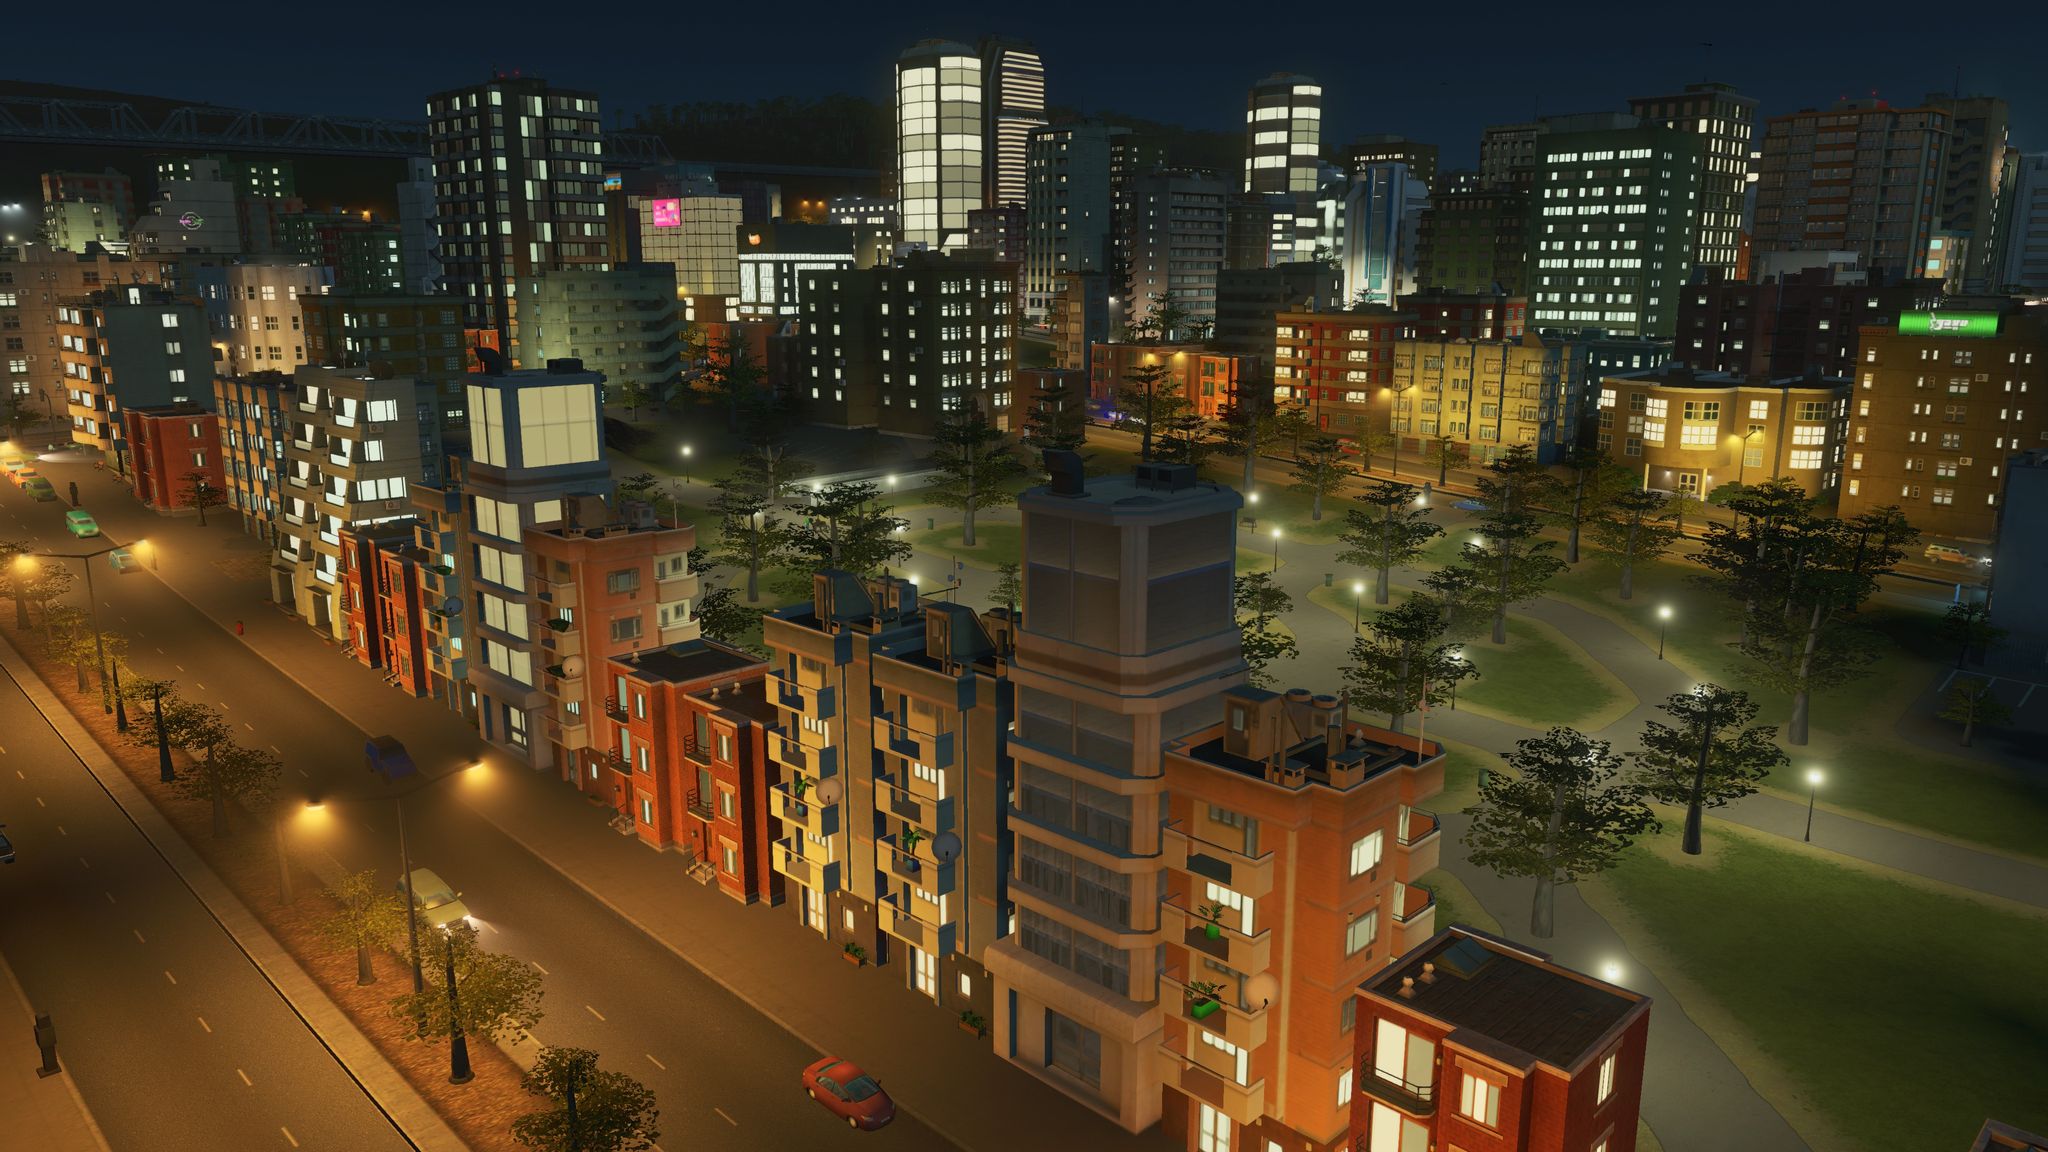 A screenshot from Cities: Skylines on Xbox One of a nighttime view of one of my cities. It has a big park with lots of paths through it surrounded by small unit blocks, with larger and taller unit blocks over the other side of the park in the distance.